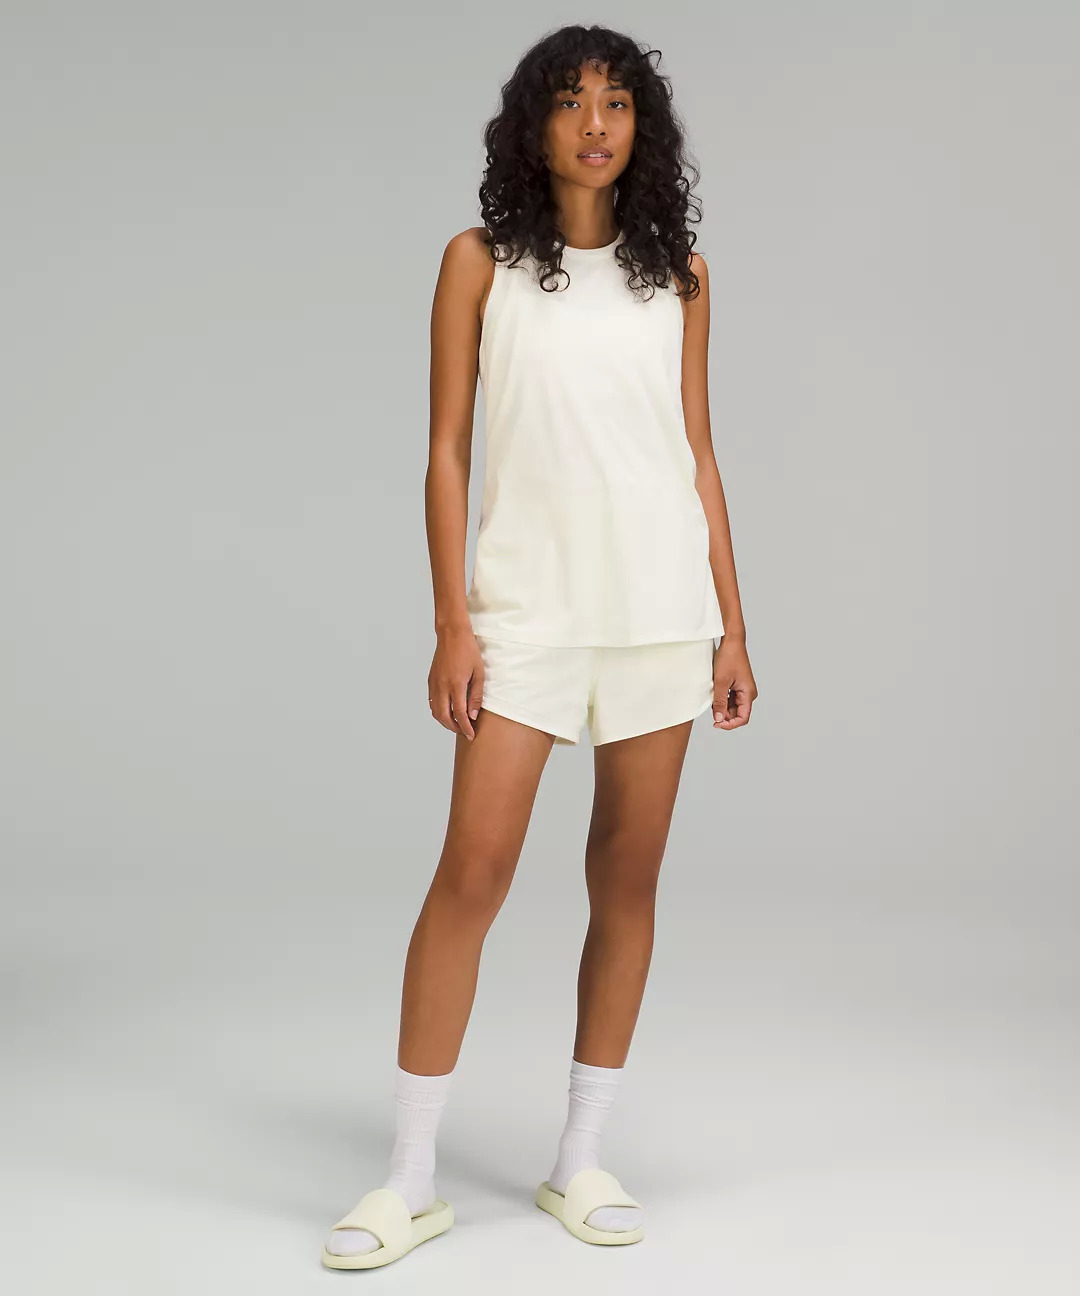 lululemon Women's Tank-And-Short 3" Romper (2 Colors) $49 + Free Shipping